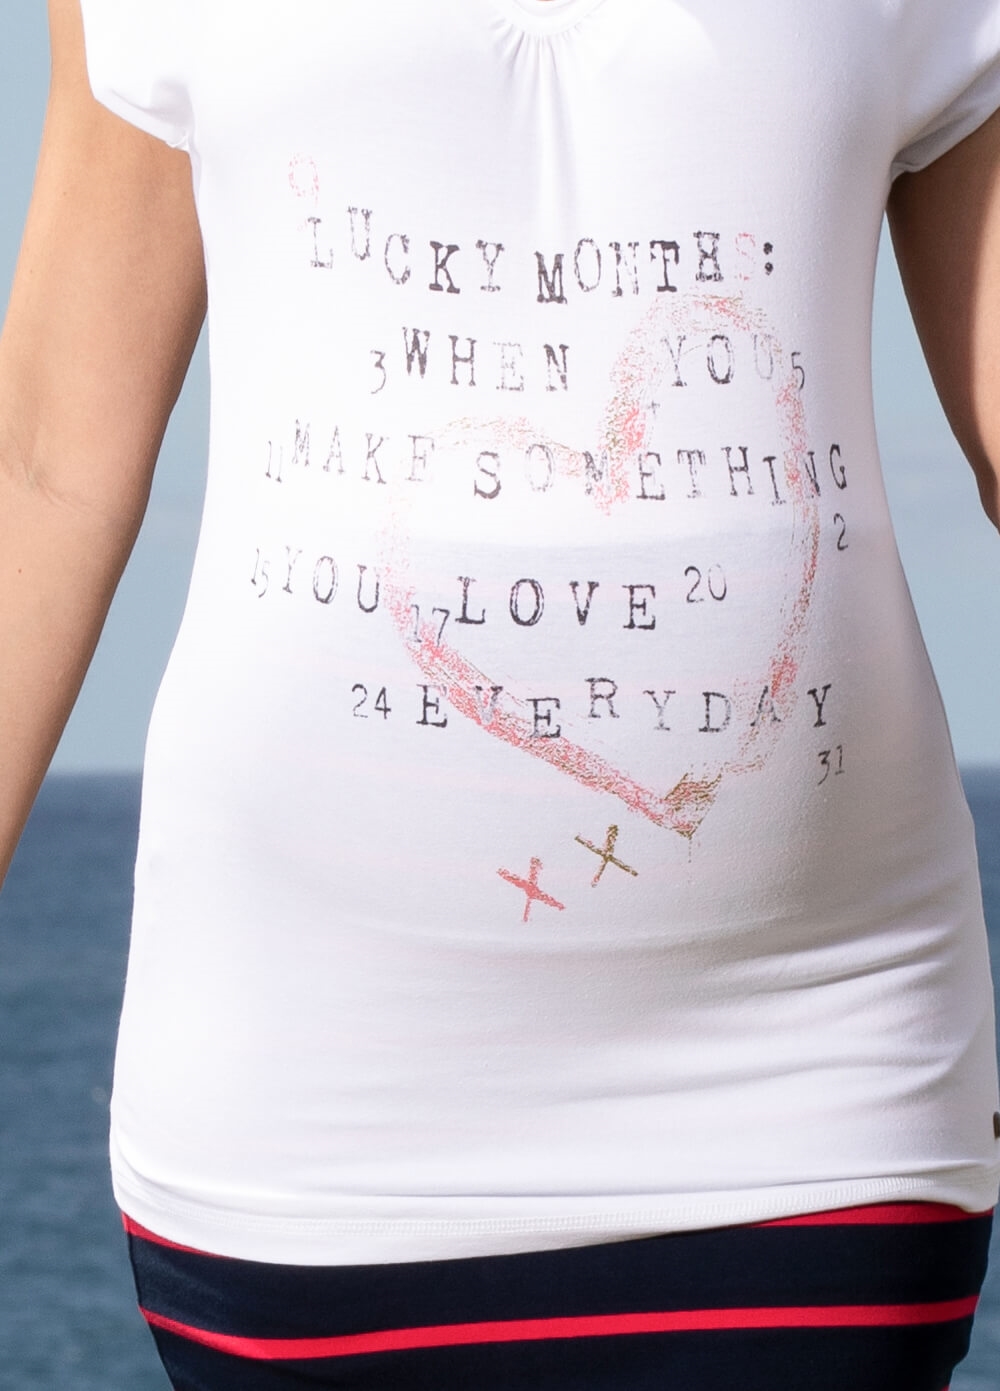 Heart Print Maternity Tee in White by Esprit